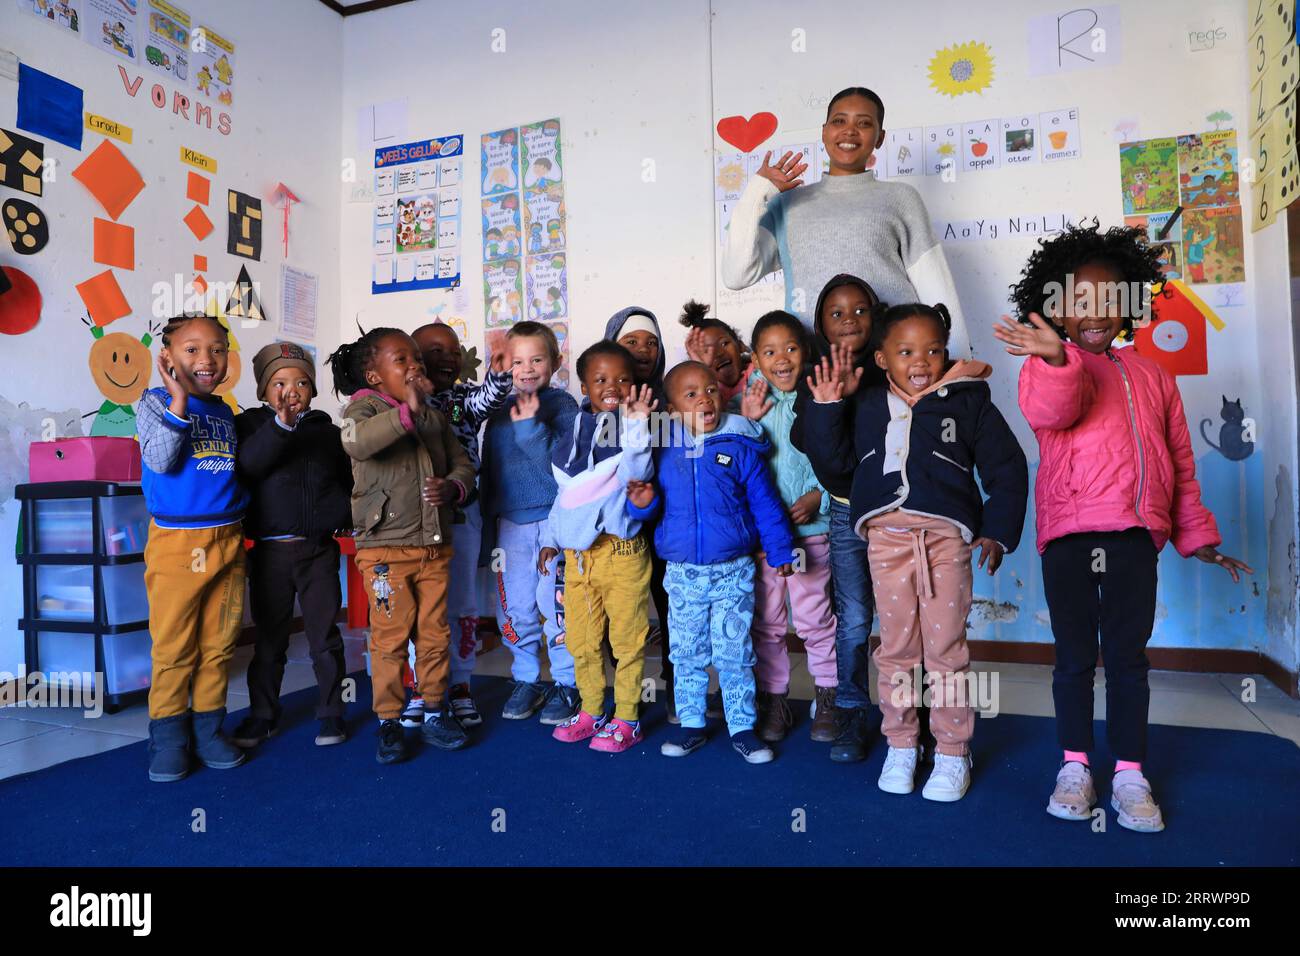 230817 -- CAPE TOWN, Aug. 17, 2023 -- A teacher and children pose for a group photo at an early learning center in De Aar Town, more than 750 kilometers northeast of Cape Town, South Africa, on Aug. 11, 2023. This early learning center was funded by Longyuan South Africa Renewables of China Longyuan Power Group Corporation Limited, which has funded the establishment of four early learning centers in De Aar to provide education for children from poor families. Nearly 500 children in need have been admitted to these learning centers so far.  SOUTH AFRICA-DE AAR-CHINA-EARLY LEARNING CENTER DongxJ Stock Photo